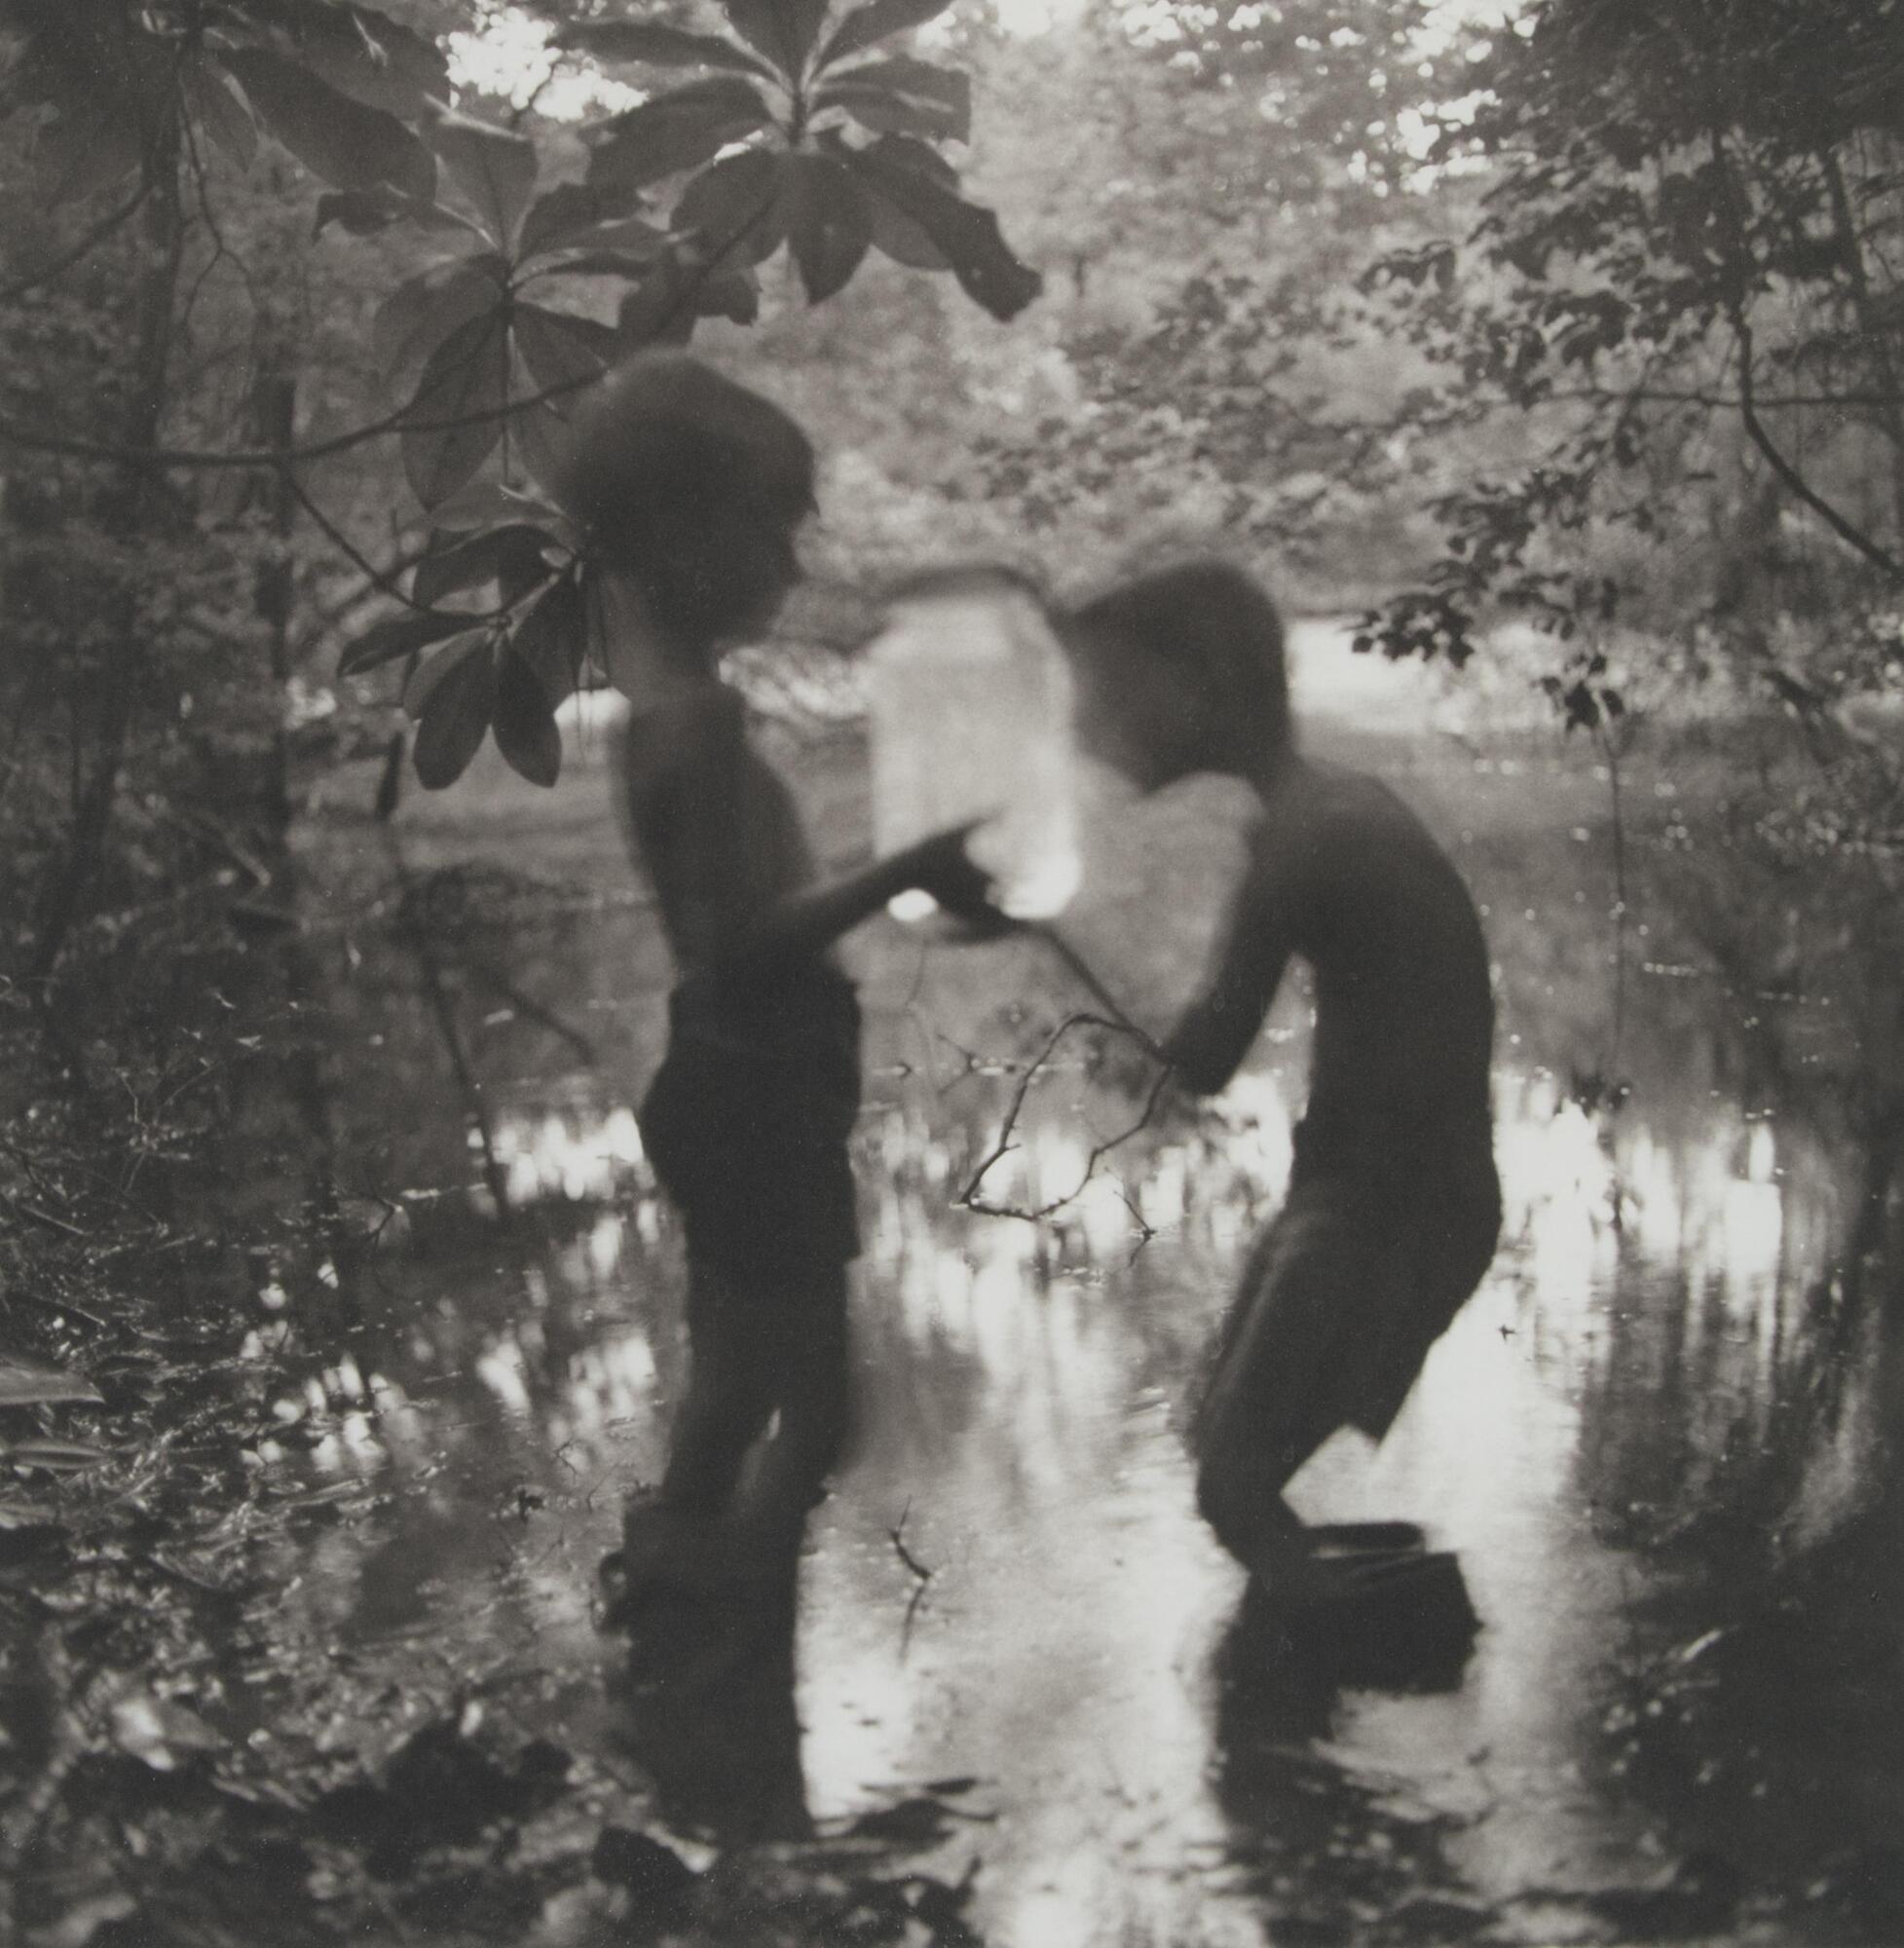 This photograph depicts a view of the silhouetted forms of two boys holding a large glass jar and standing in a body of fresh water surrounded by trees.